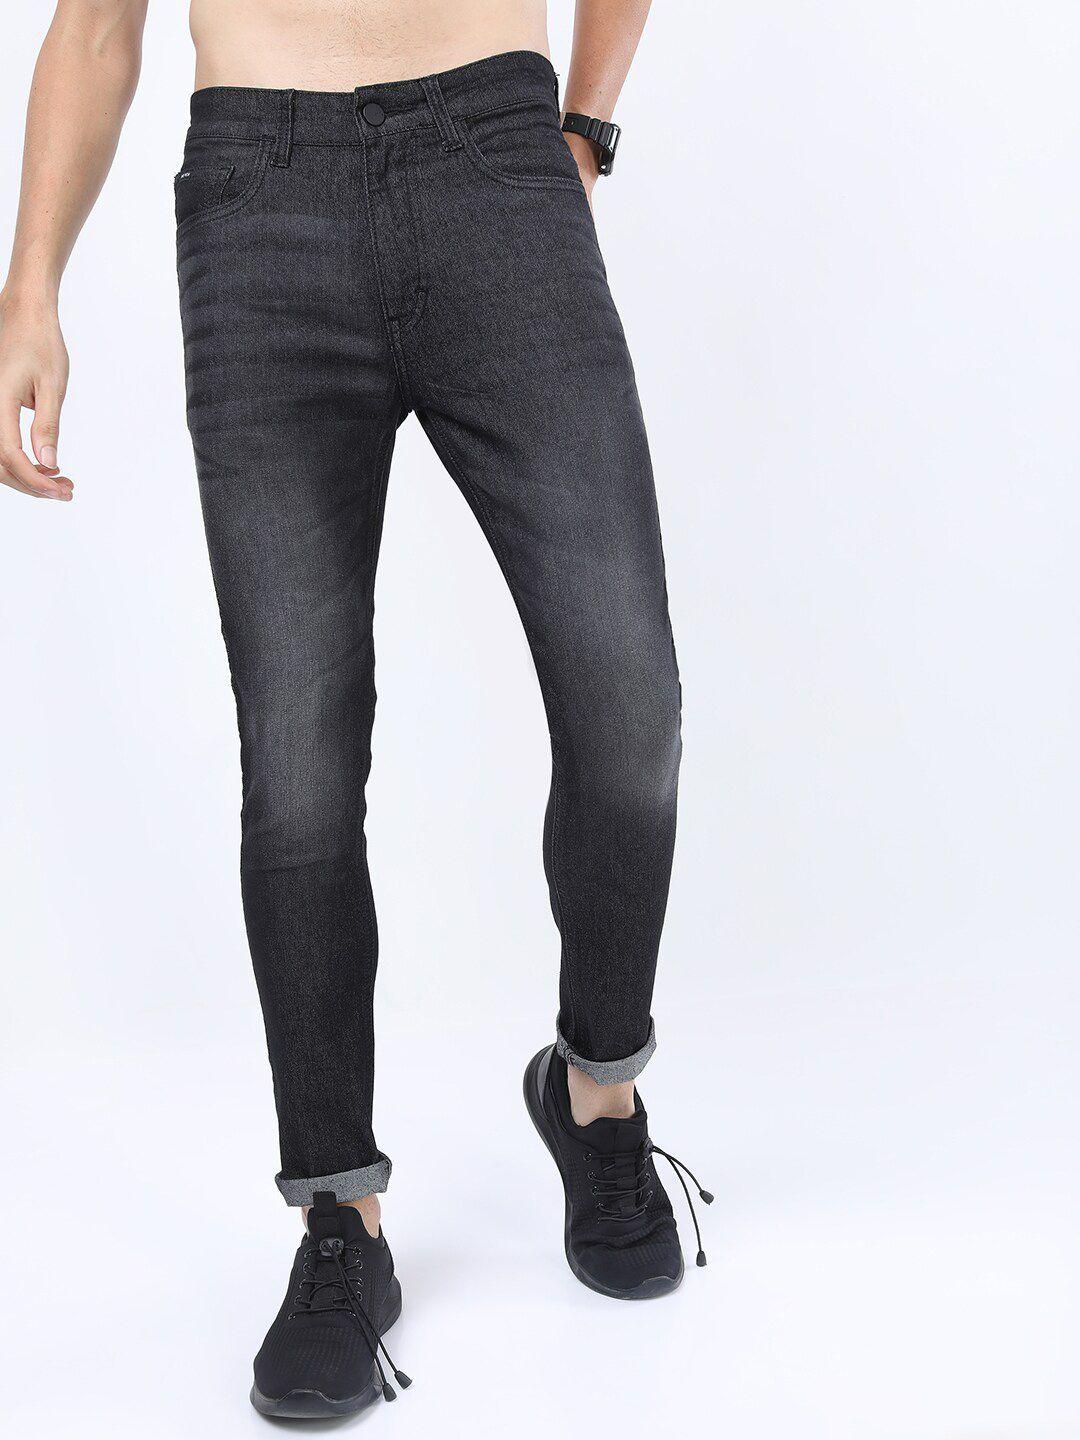 ketch-men-black-skinny-fit-mid-rise-stretchable-jeans